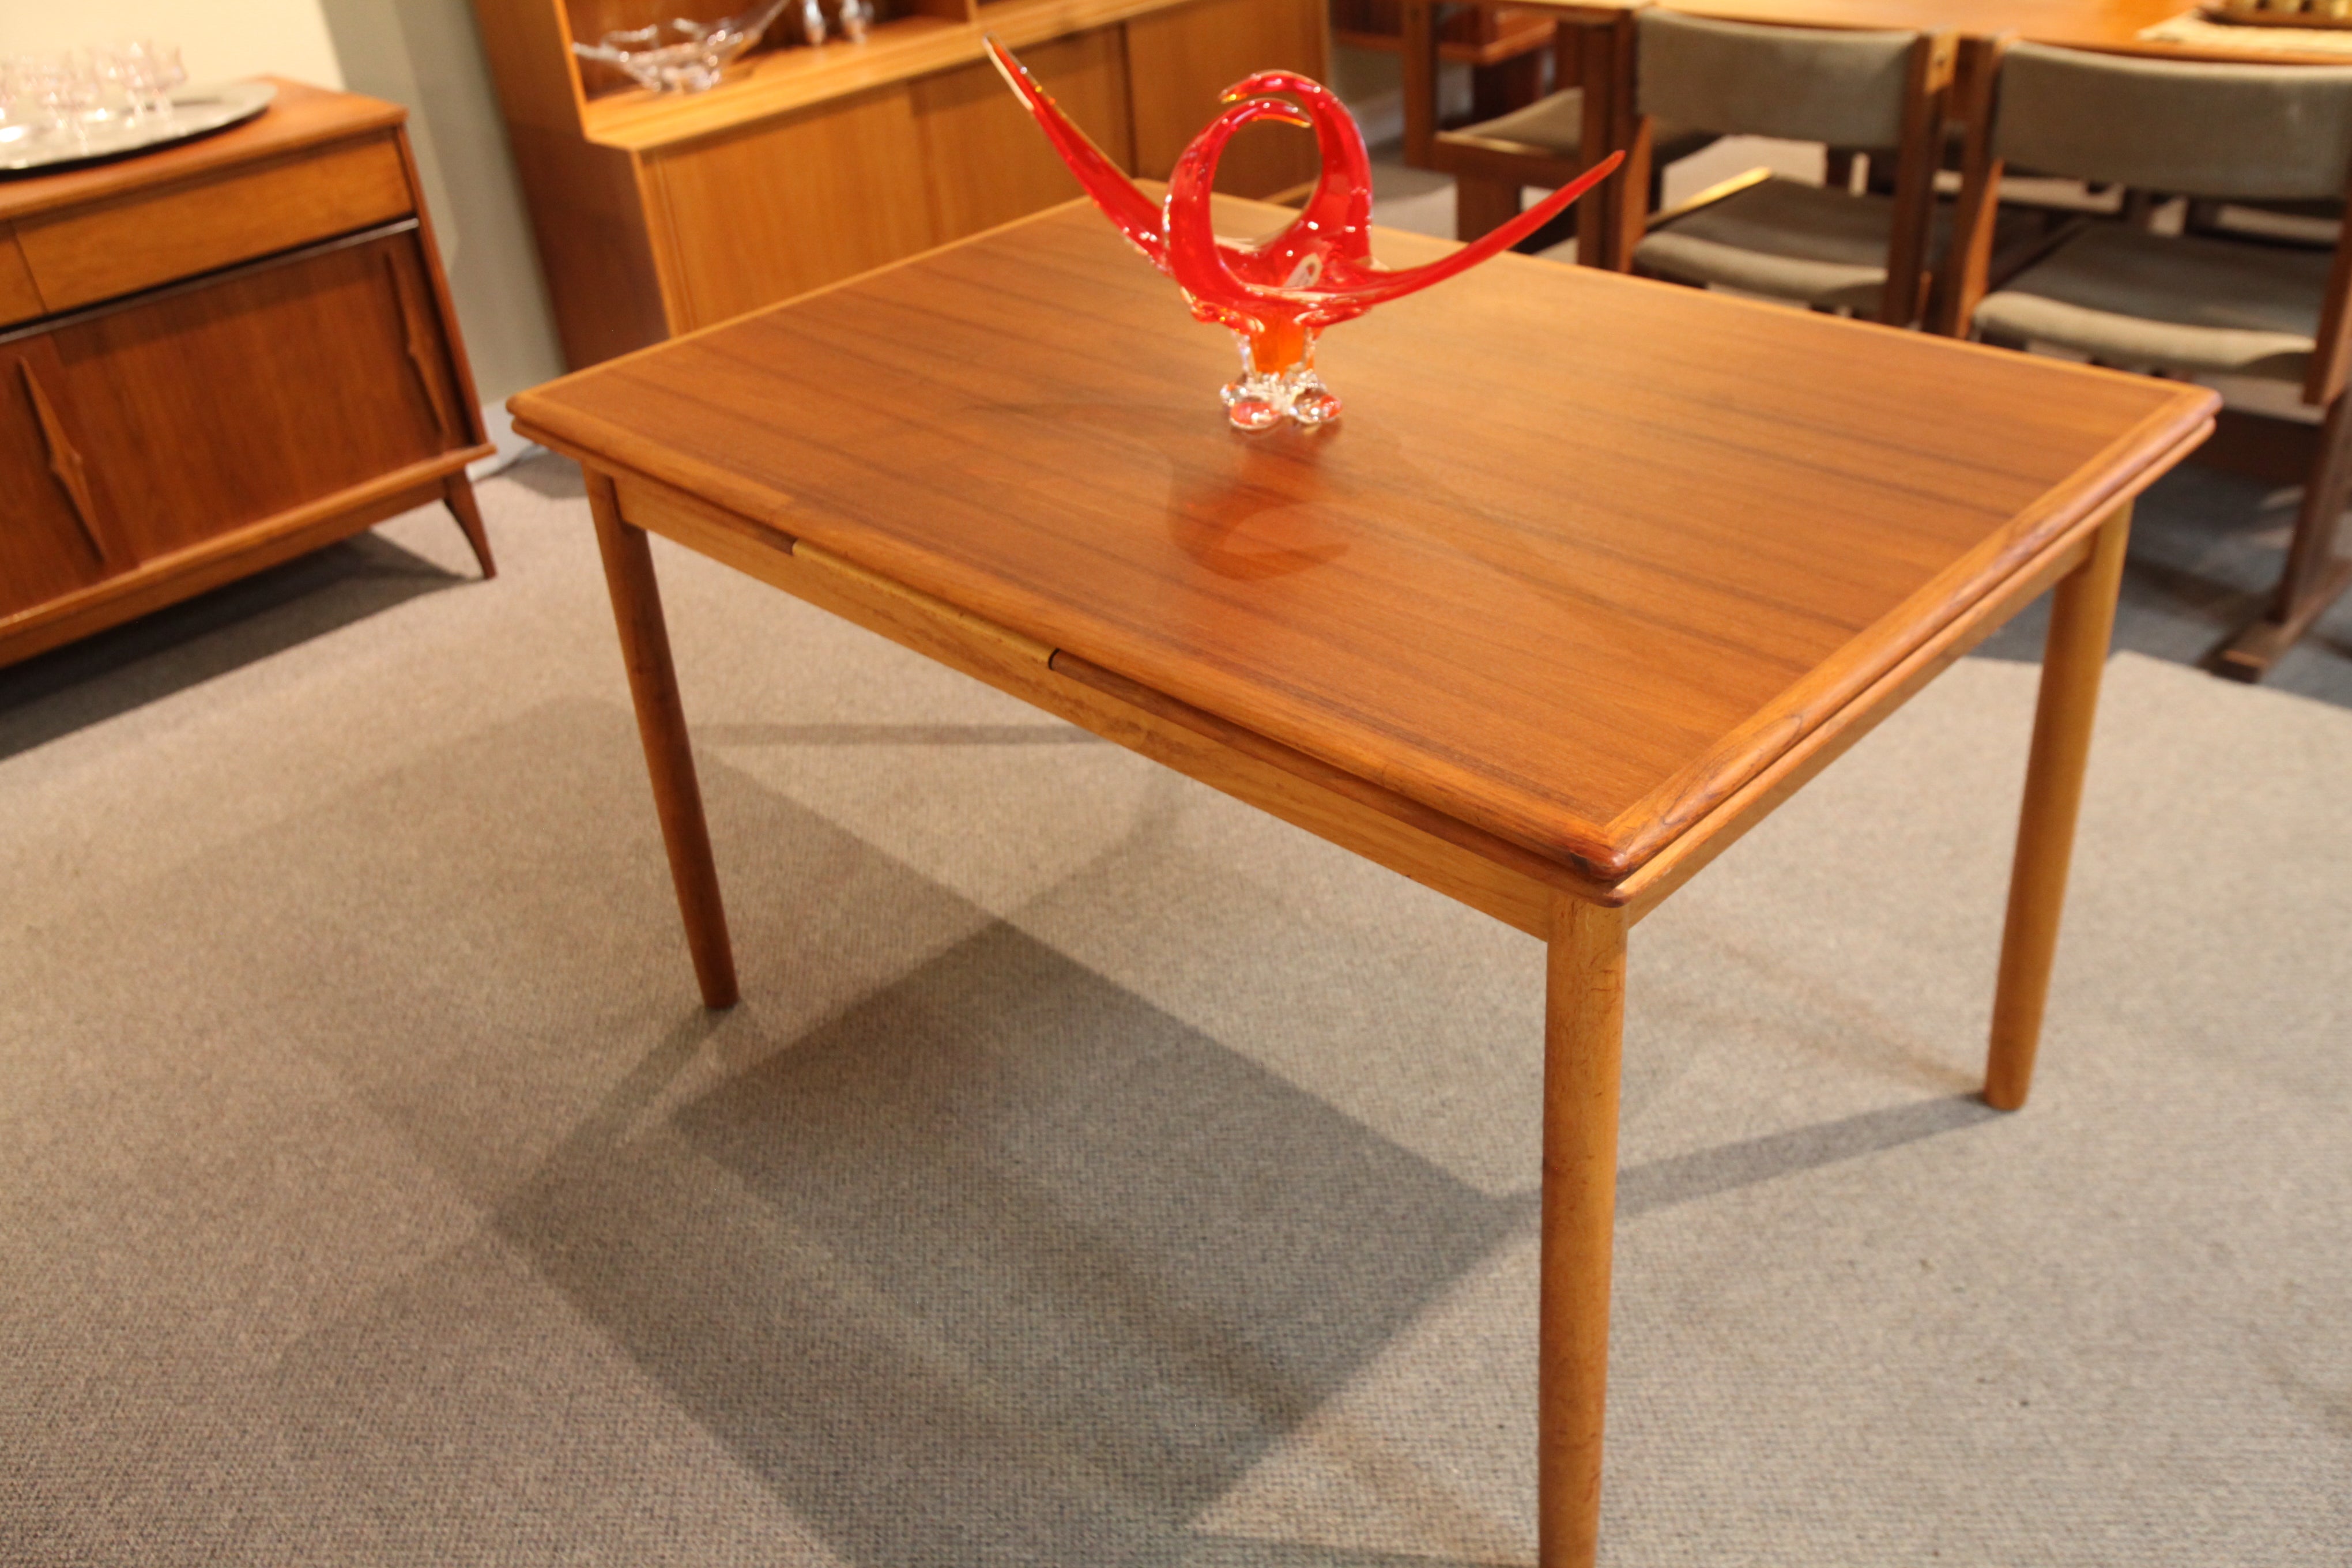 Vintage Danish Teak Extension Dining Table (49.5" x 33.5" x 29"H) or (86.5" x 33.5" x 29"H)